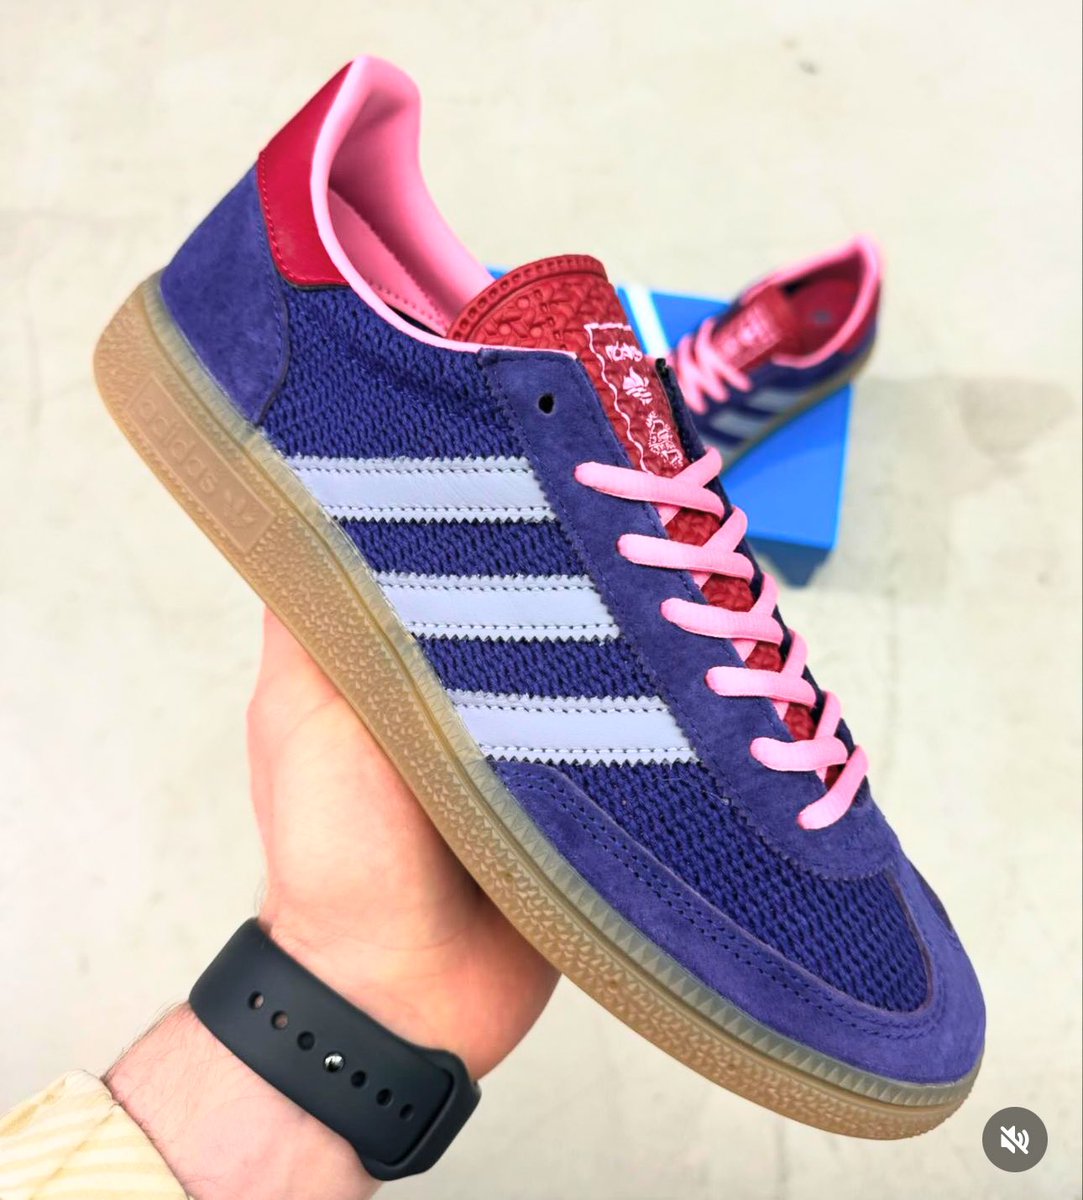 #Ad adidas Handball Spezial “Mesh” now online and available at tidd.ly/3y1dyot Price: £90